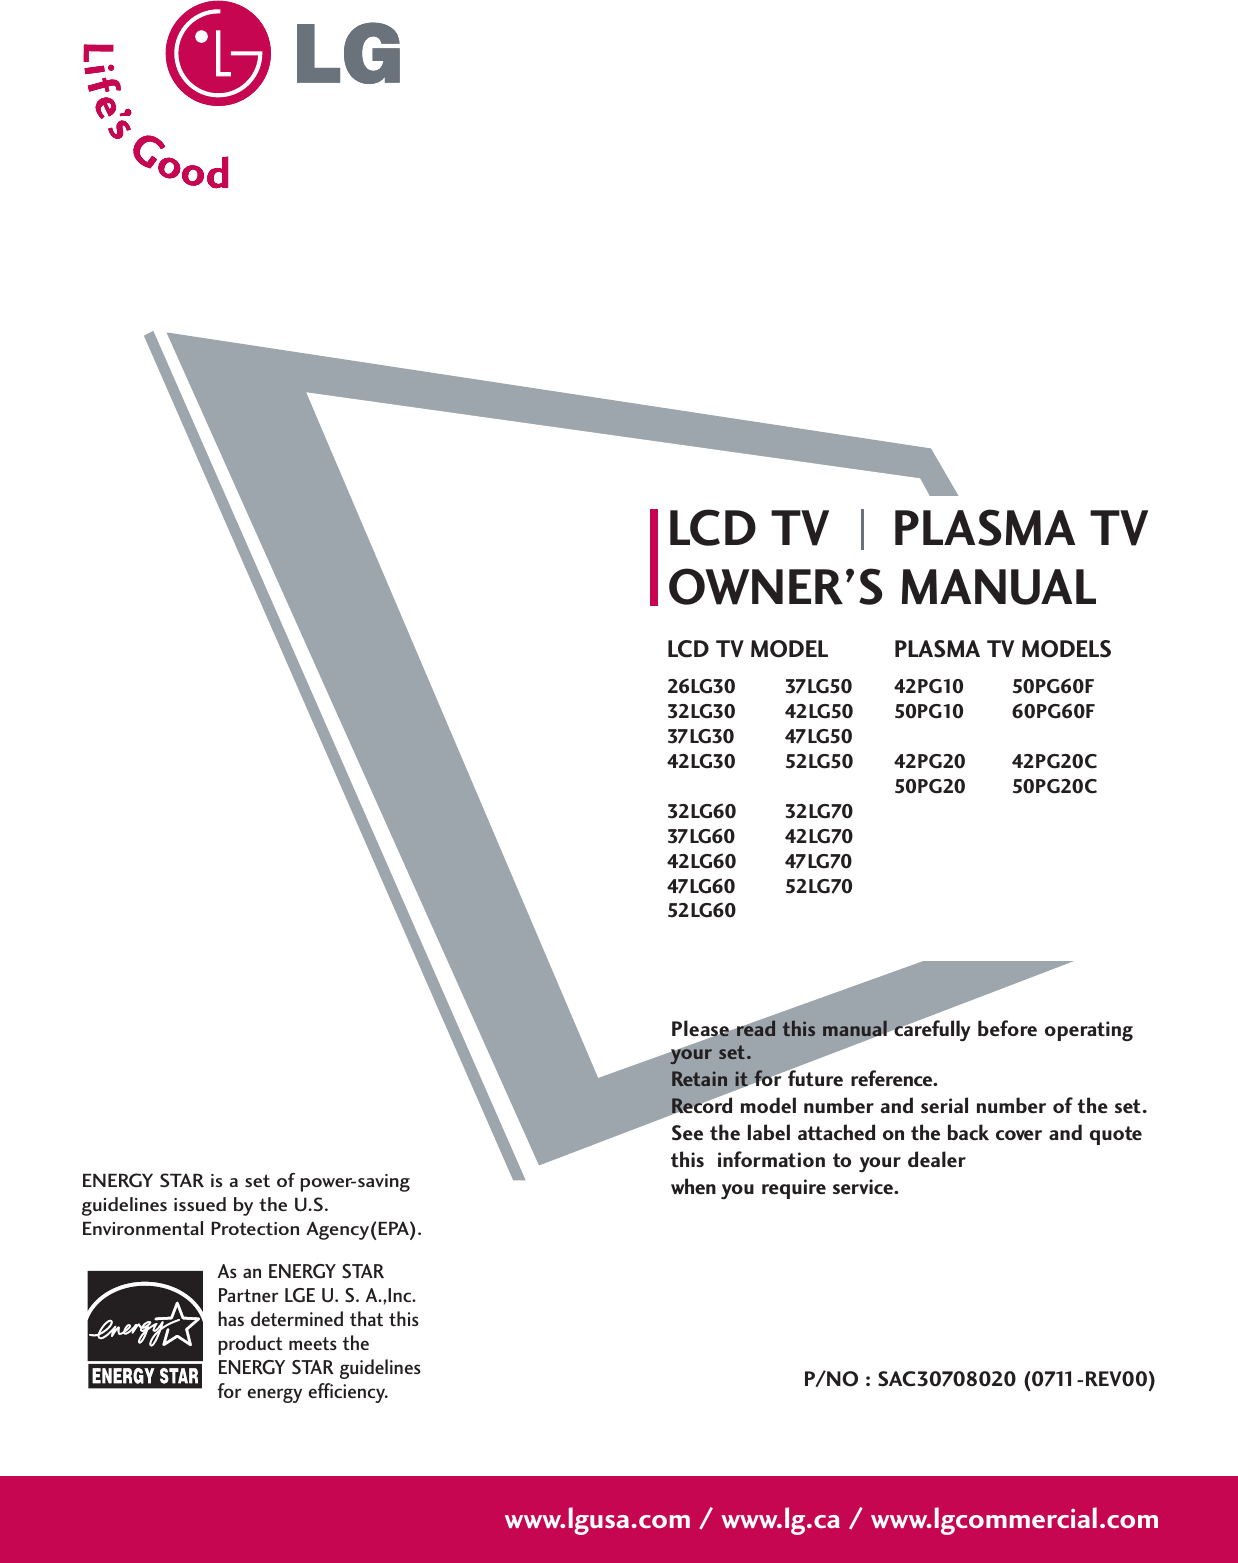 Please read this manual carefully before operatingyour set. Retain it for future reference.Record model number and serial number of the set. See the label attached on the back cover and quote this  information to your dealer when you require service.LCD TV PLASMA TVOWNER’S MANUALLCD TV MODEL26LG30 37LG5032LG30 42LG5037LG30 47LG5042LG30 52LG5032LG60 32LG7037LG60 42LG7042LG60 47LG7047LG60 52LG7052LG60PLASMA TV MODELS42PG10 50PG60F50PG10 60PG60F42PG20 42PG20C50PG20 50PG20CP/NO : SAC30708020 (0711-REV00)www.lgusa.com / www.lg.ca / www.lgcommercial.comAs an ENERGY STARPartner LGE U. S. A.,Inc.has determined that thisproduct meets theENERGY STAR guidelinesfor energy efficiency.ENERGY STAR is a set of power-savingguidelines issued by the U.S.Environmental Protection Agency(EPA).